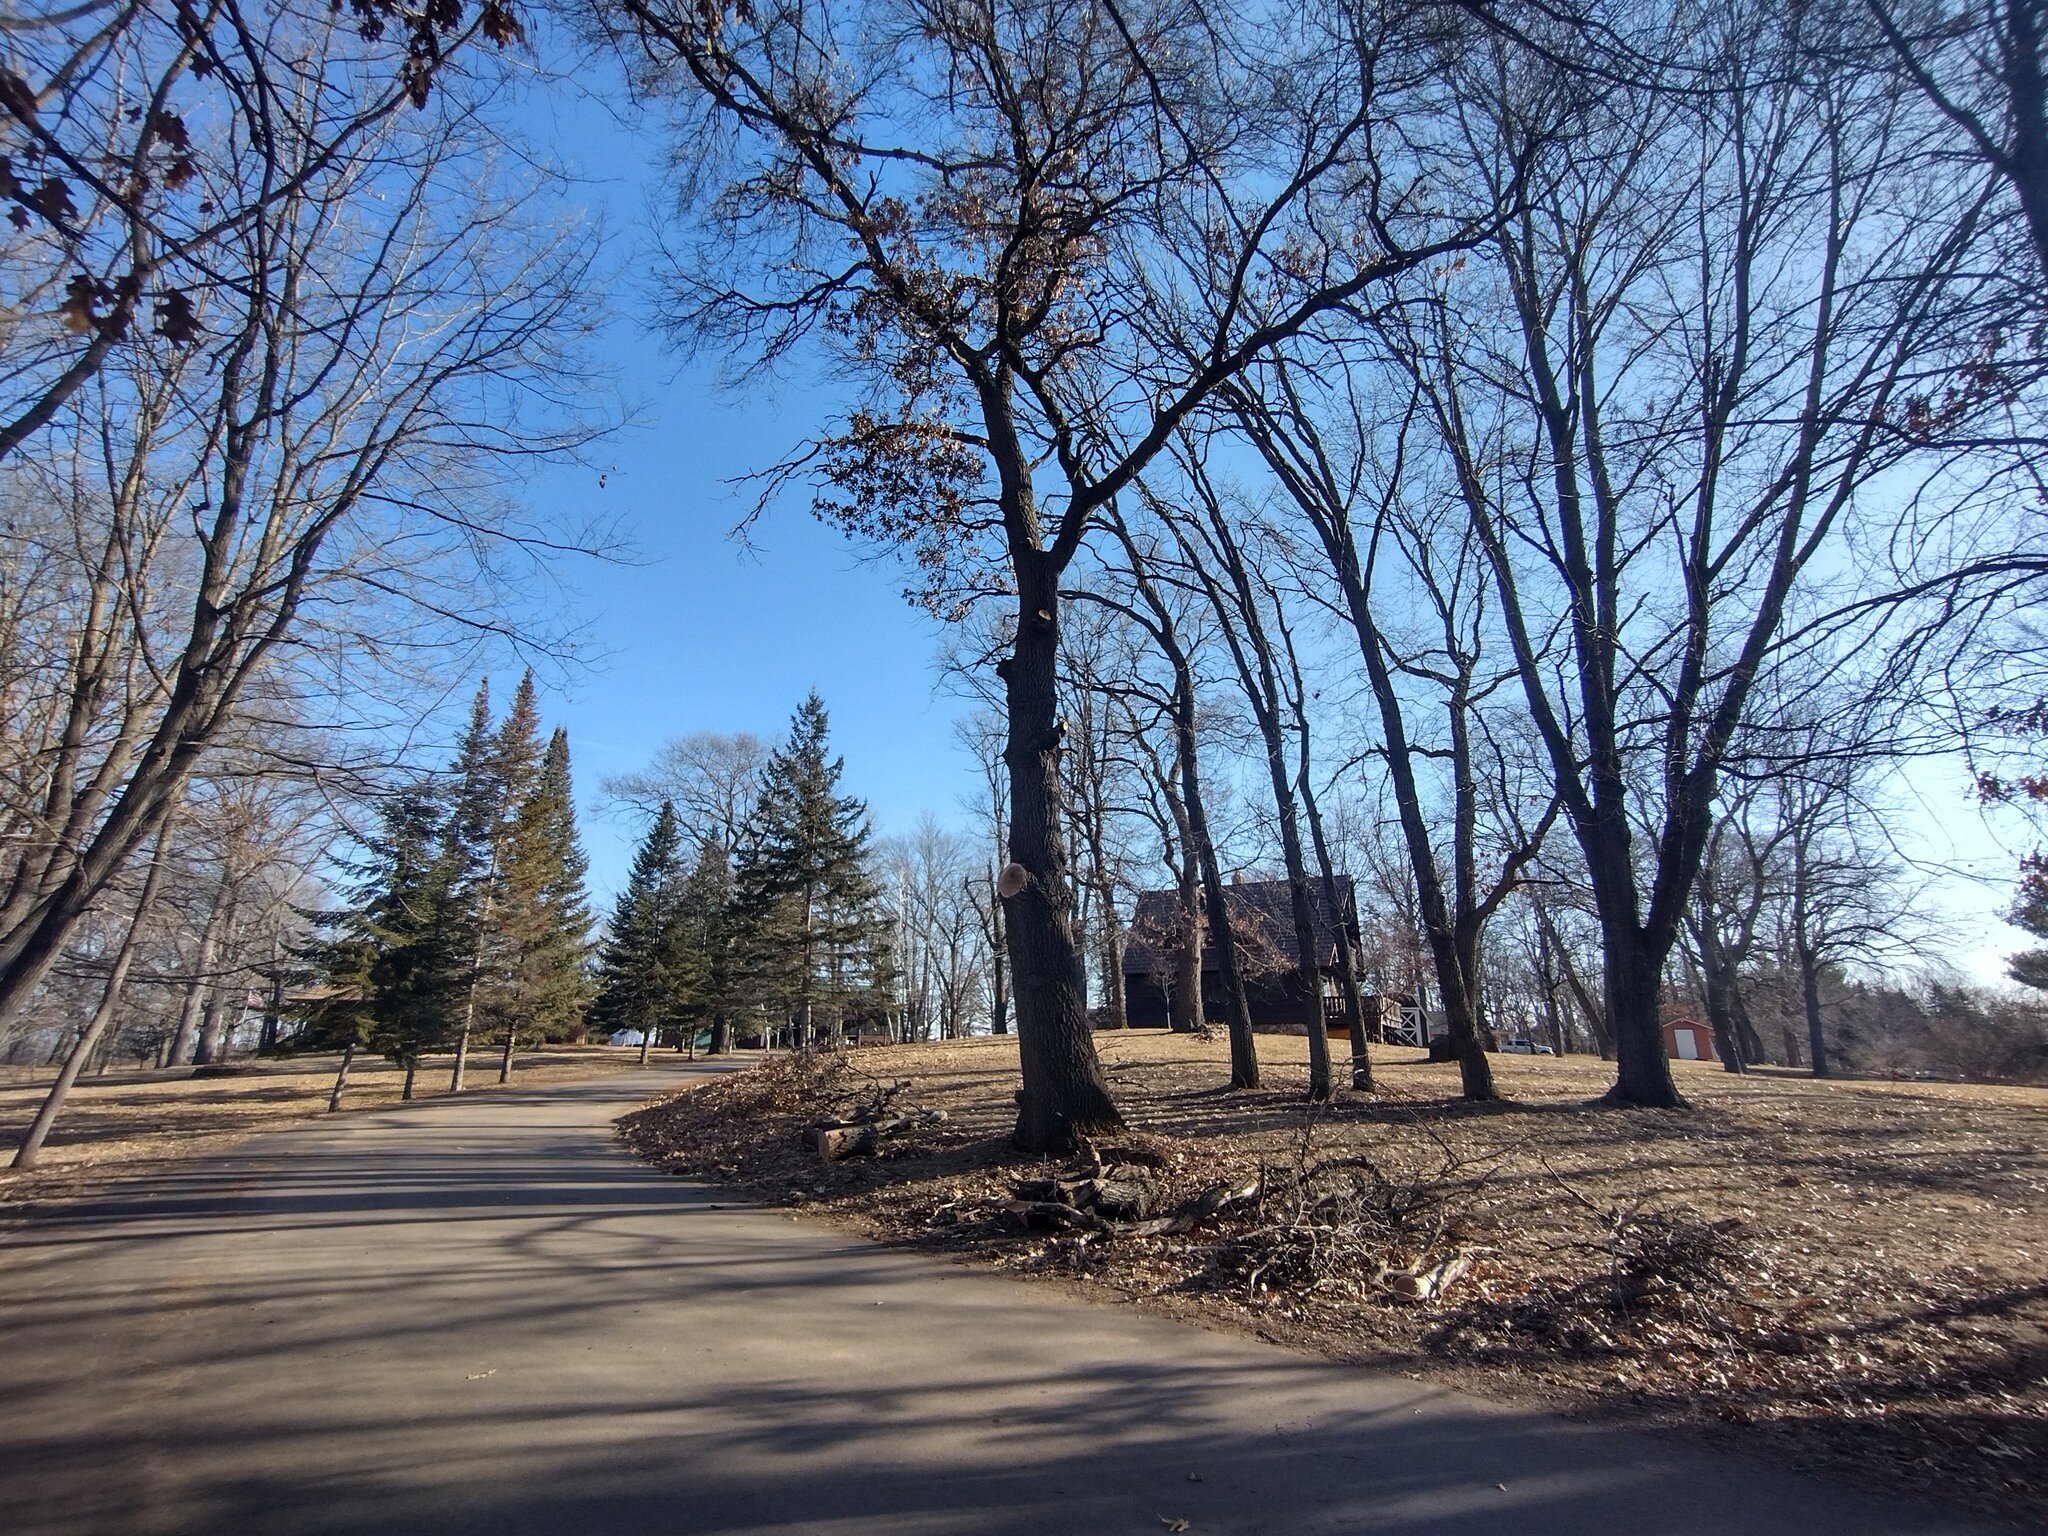 Large declining Red Oak in Pine City that had some very large deadwood over the road. We let the customer know that it looks to have two lined chestnut borer issues and is potentially developing Oak Wilt, though that remains to be seen. For now, we'r